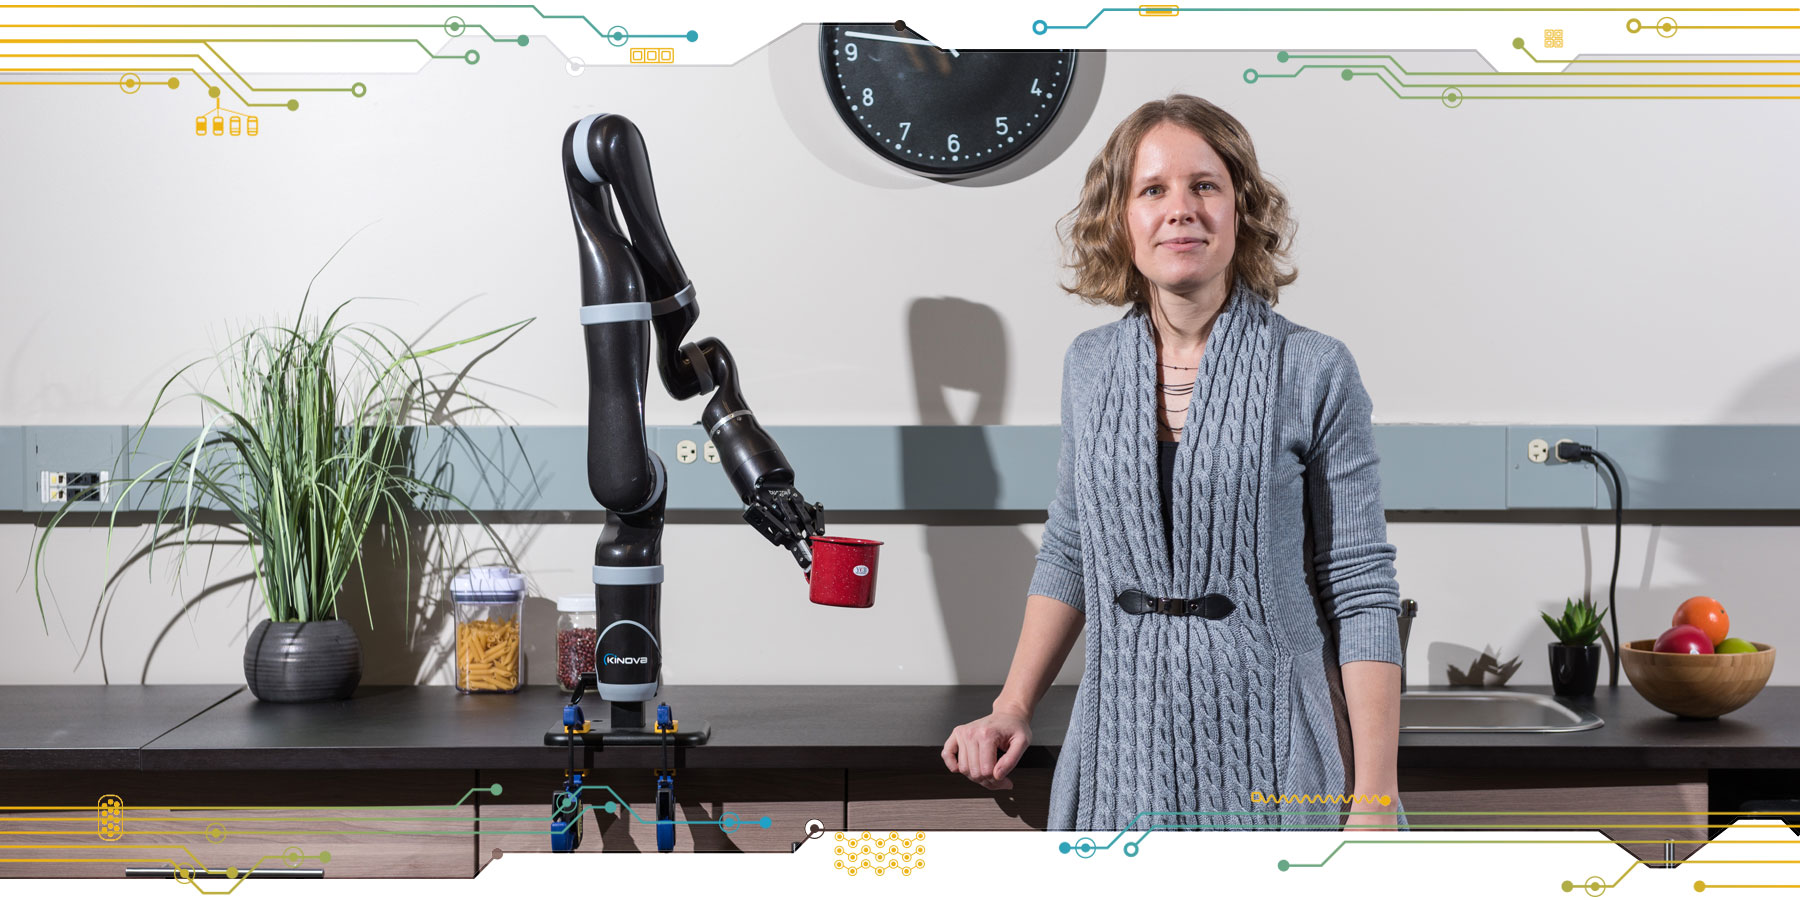 Researcher Sonia Chernova with a robot arm being trained to grasp objects